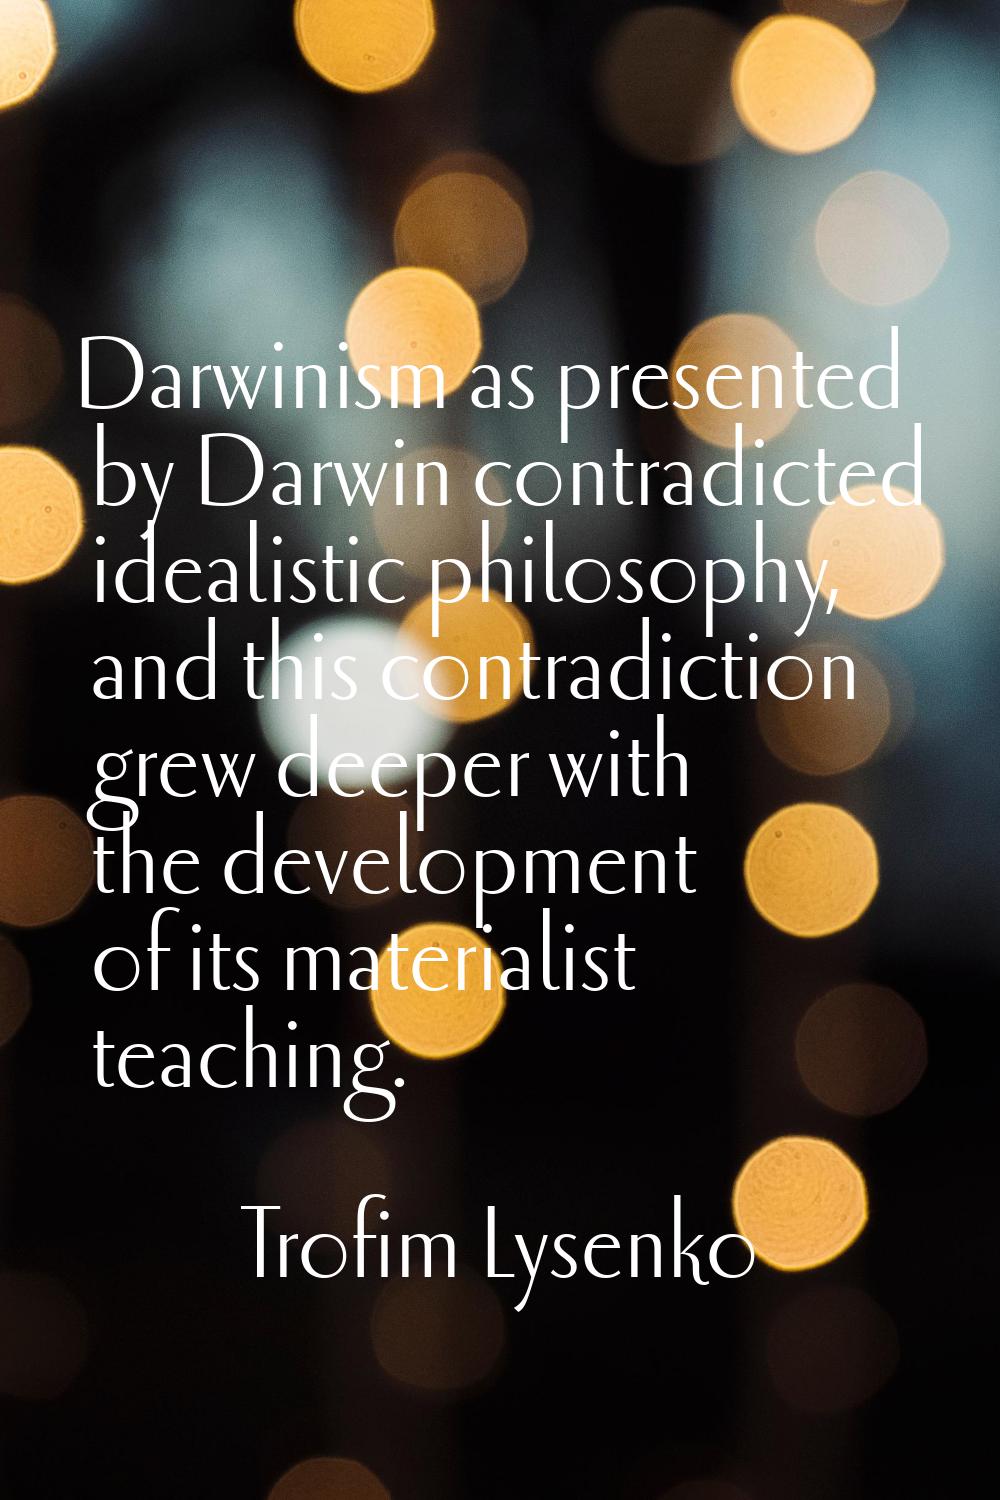 Darwinism as presented by Darwin contradicted idealistic philosophy, and this contradiction grew de